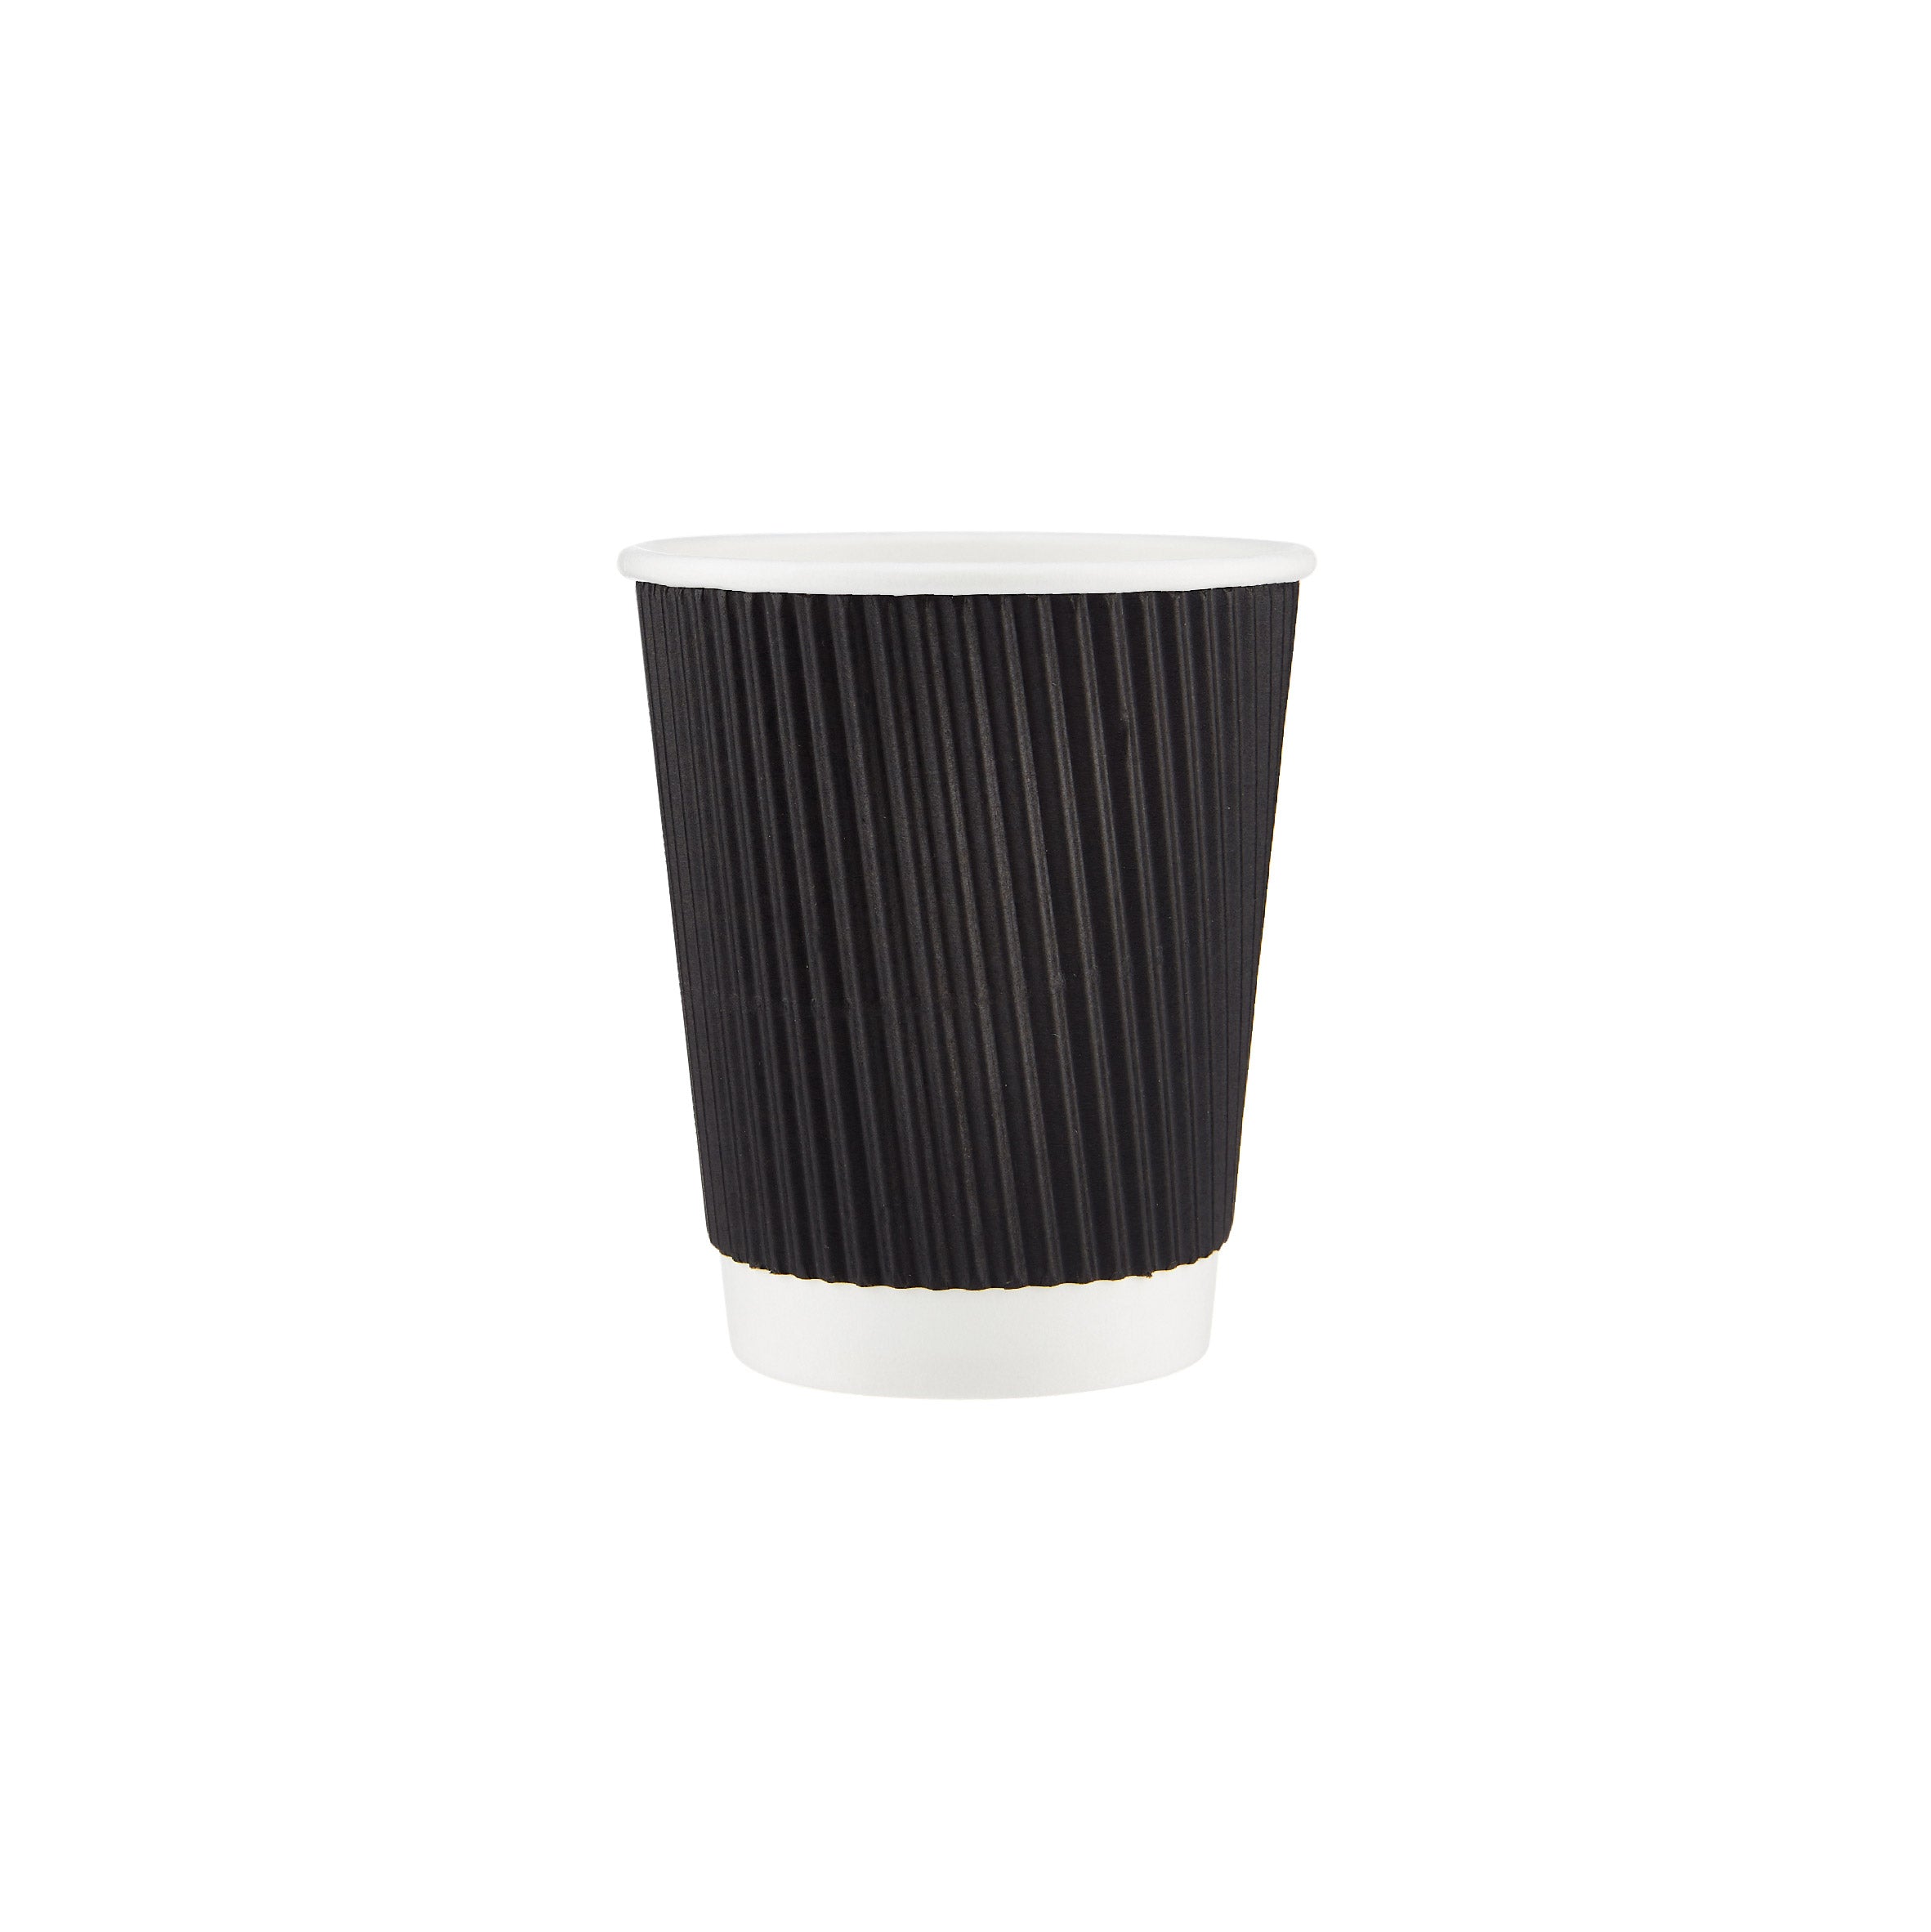 12 oz Red Paper Coffee Cup - Ripple Wall - 3 1/2 x 3 1/2 x 4 1/4 - 500  count box